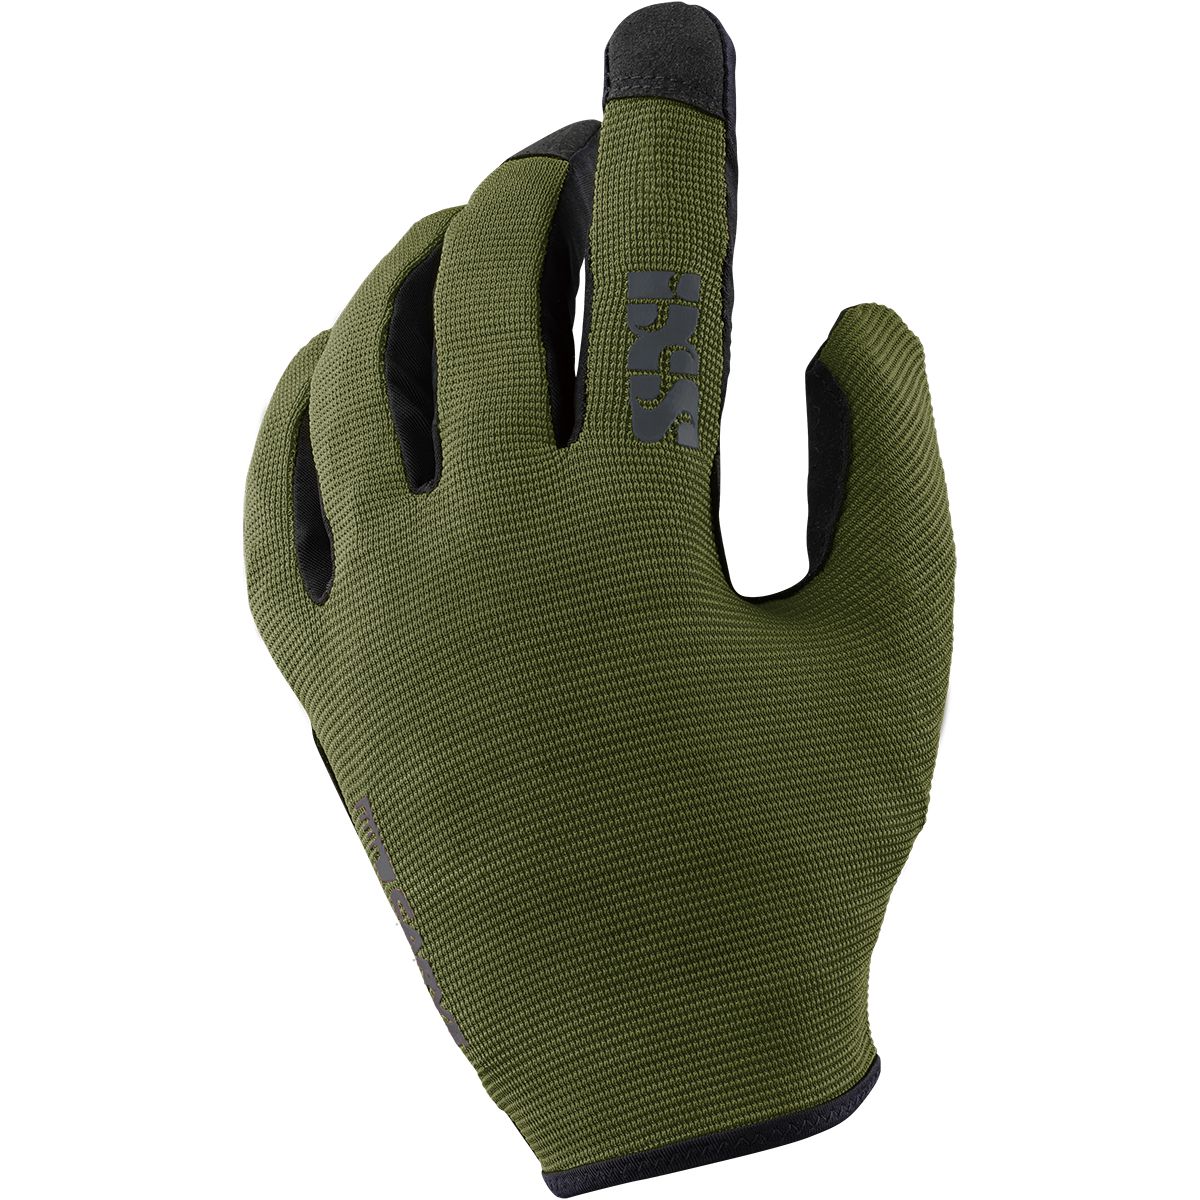 iXS IXS Carve Gloves - Gloves - Bicycle Warehouse